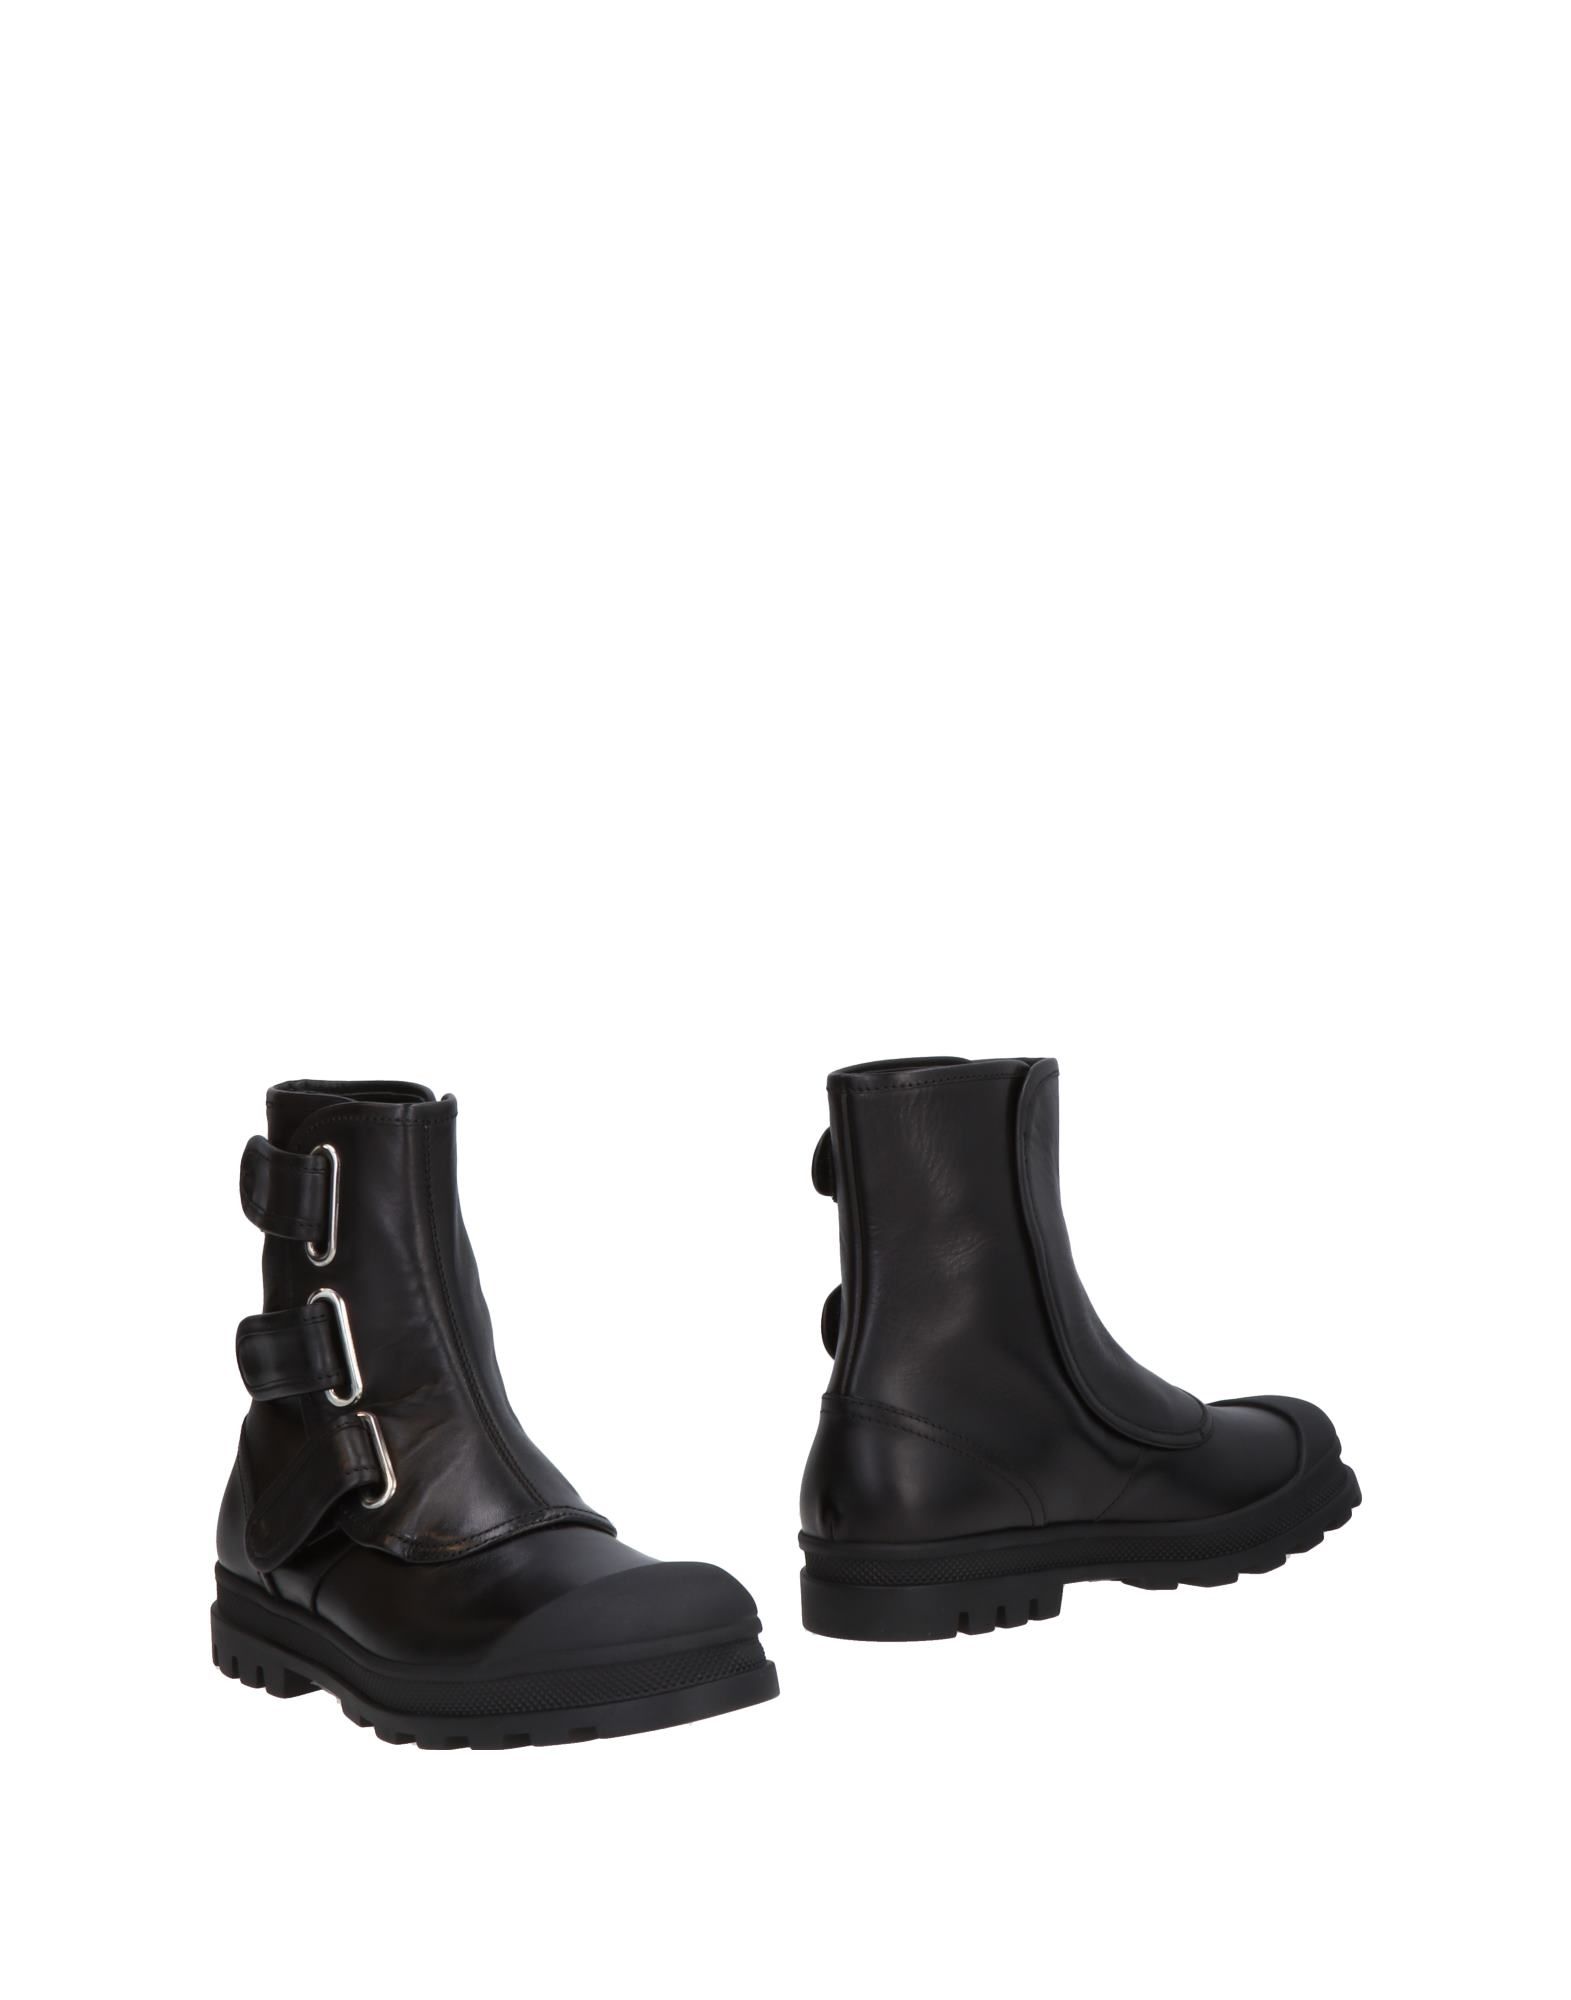 DIESEL BLACK GOLD ANKLE BOOTS,11498804RX 7